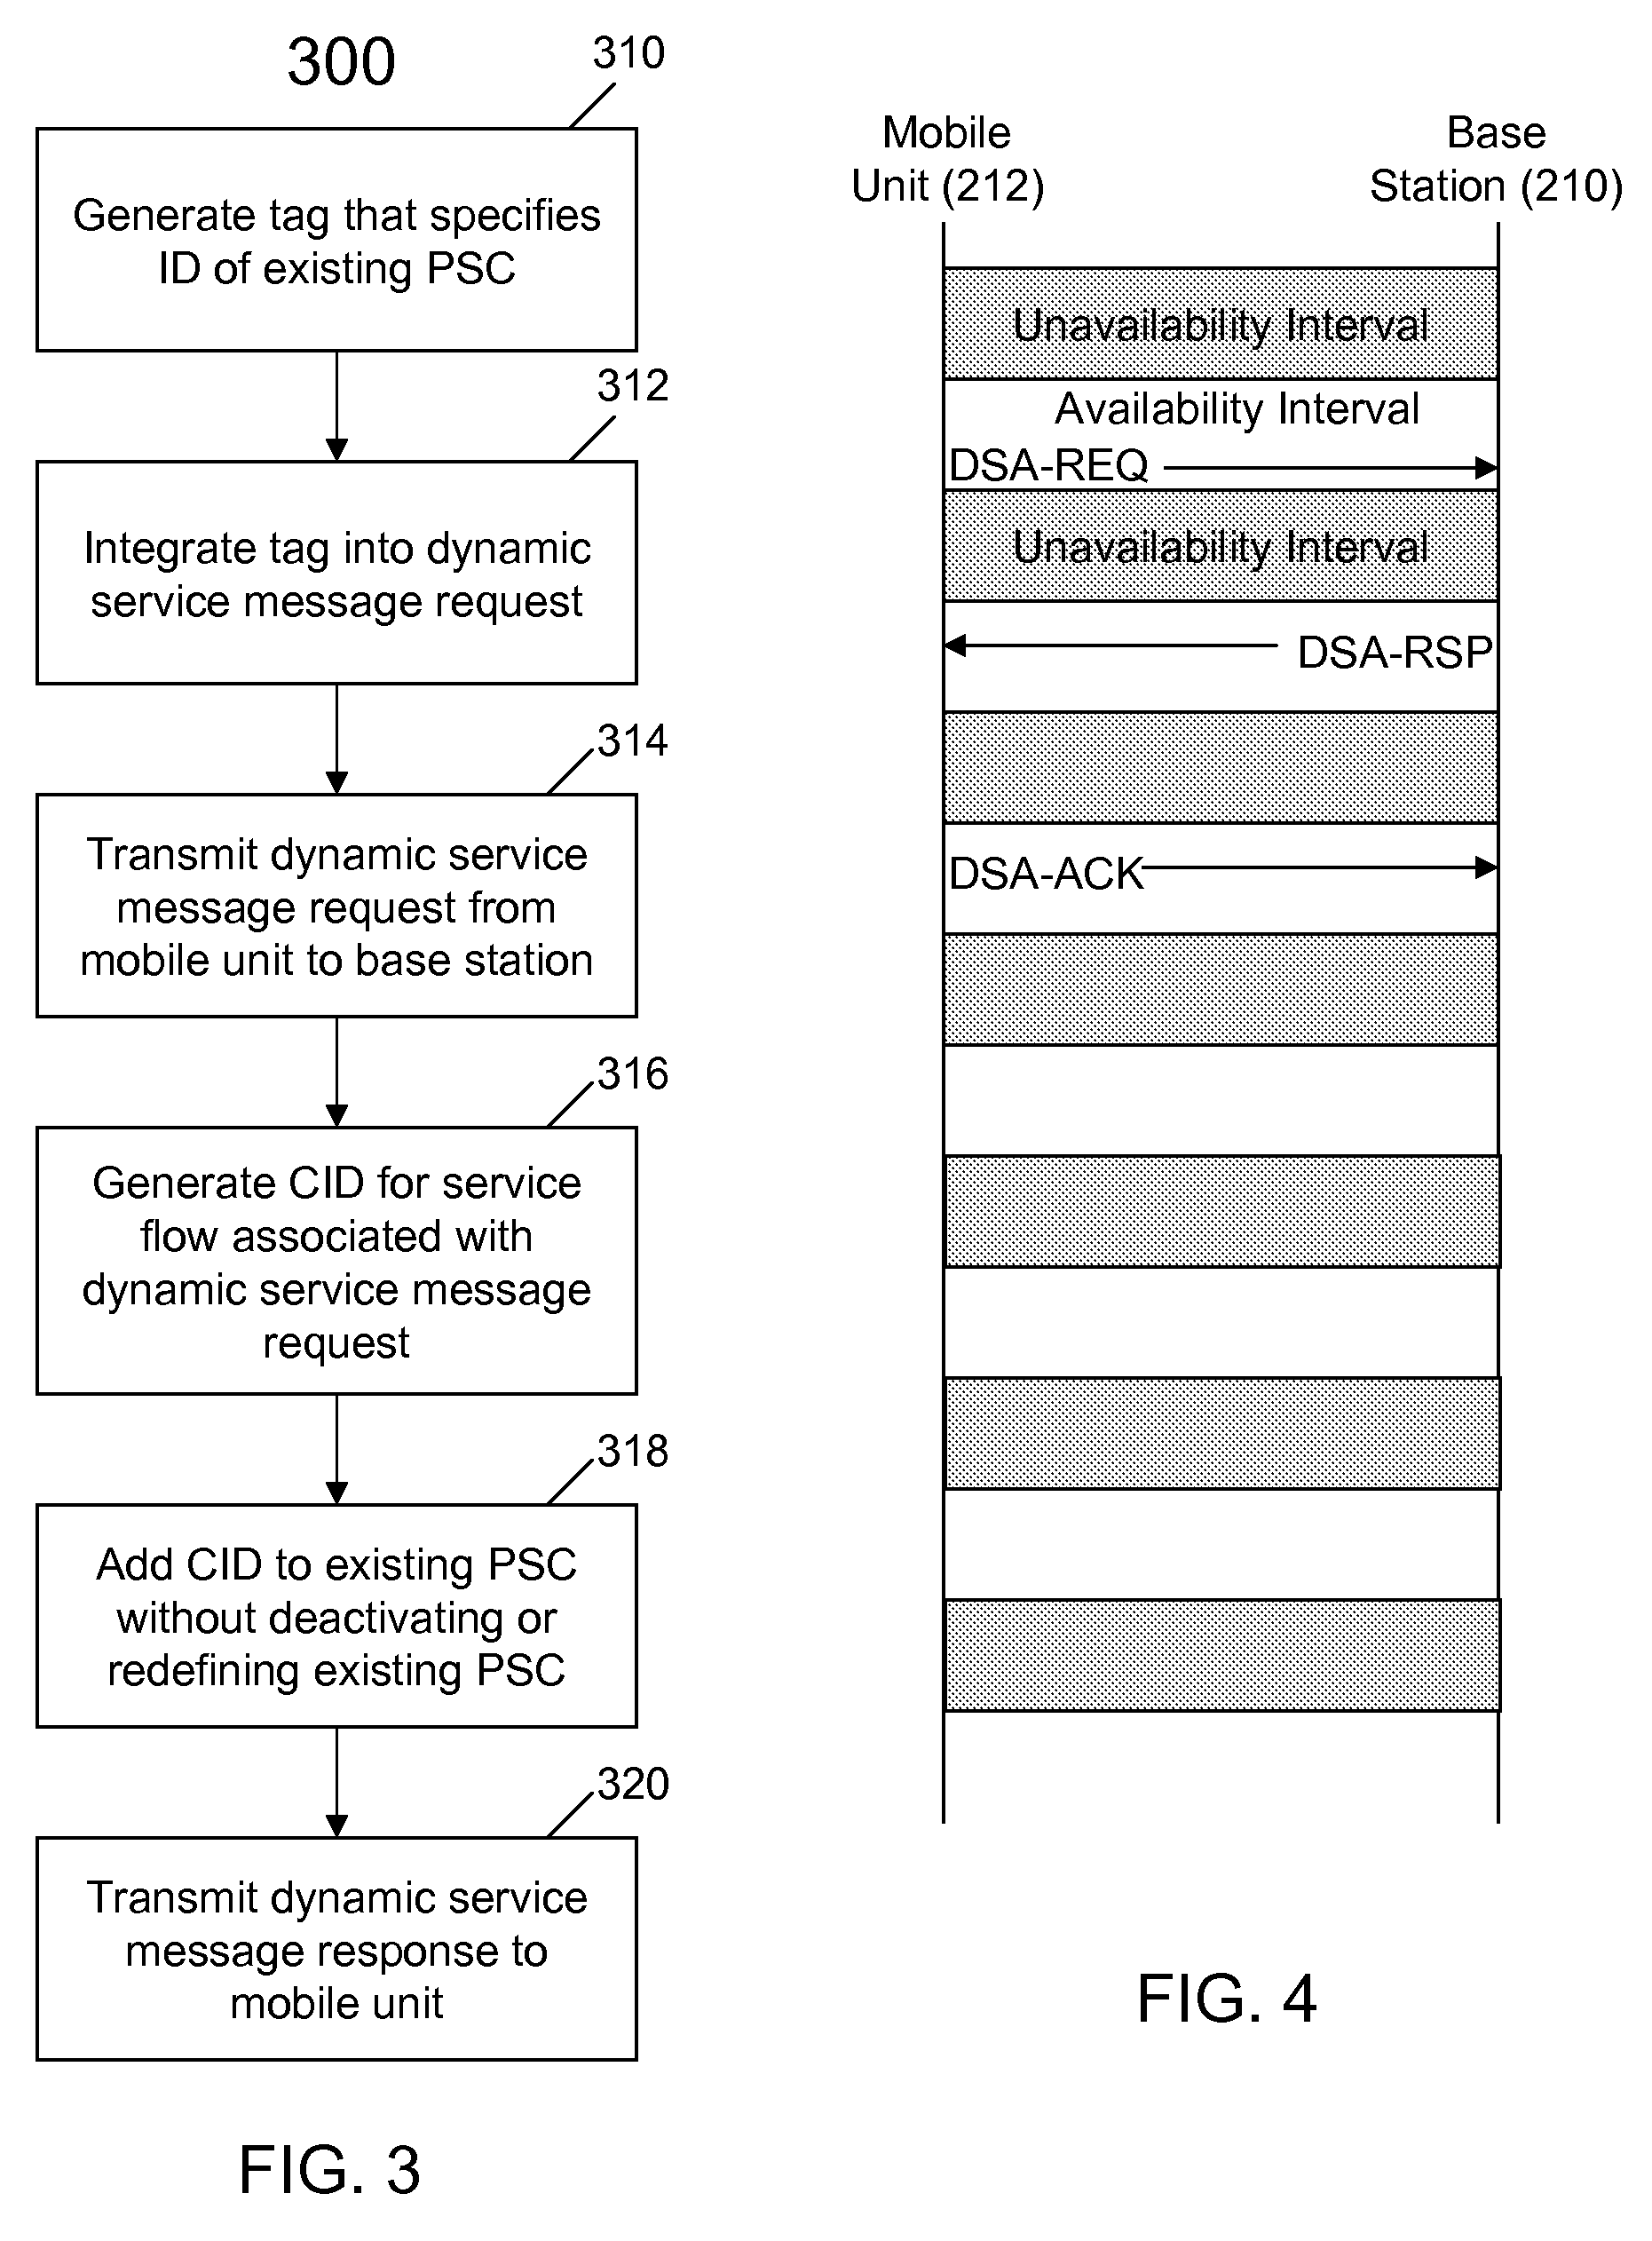 Method and System for Adding a New Connection Identifier to an Existing Power Save Class